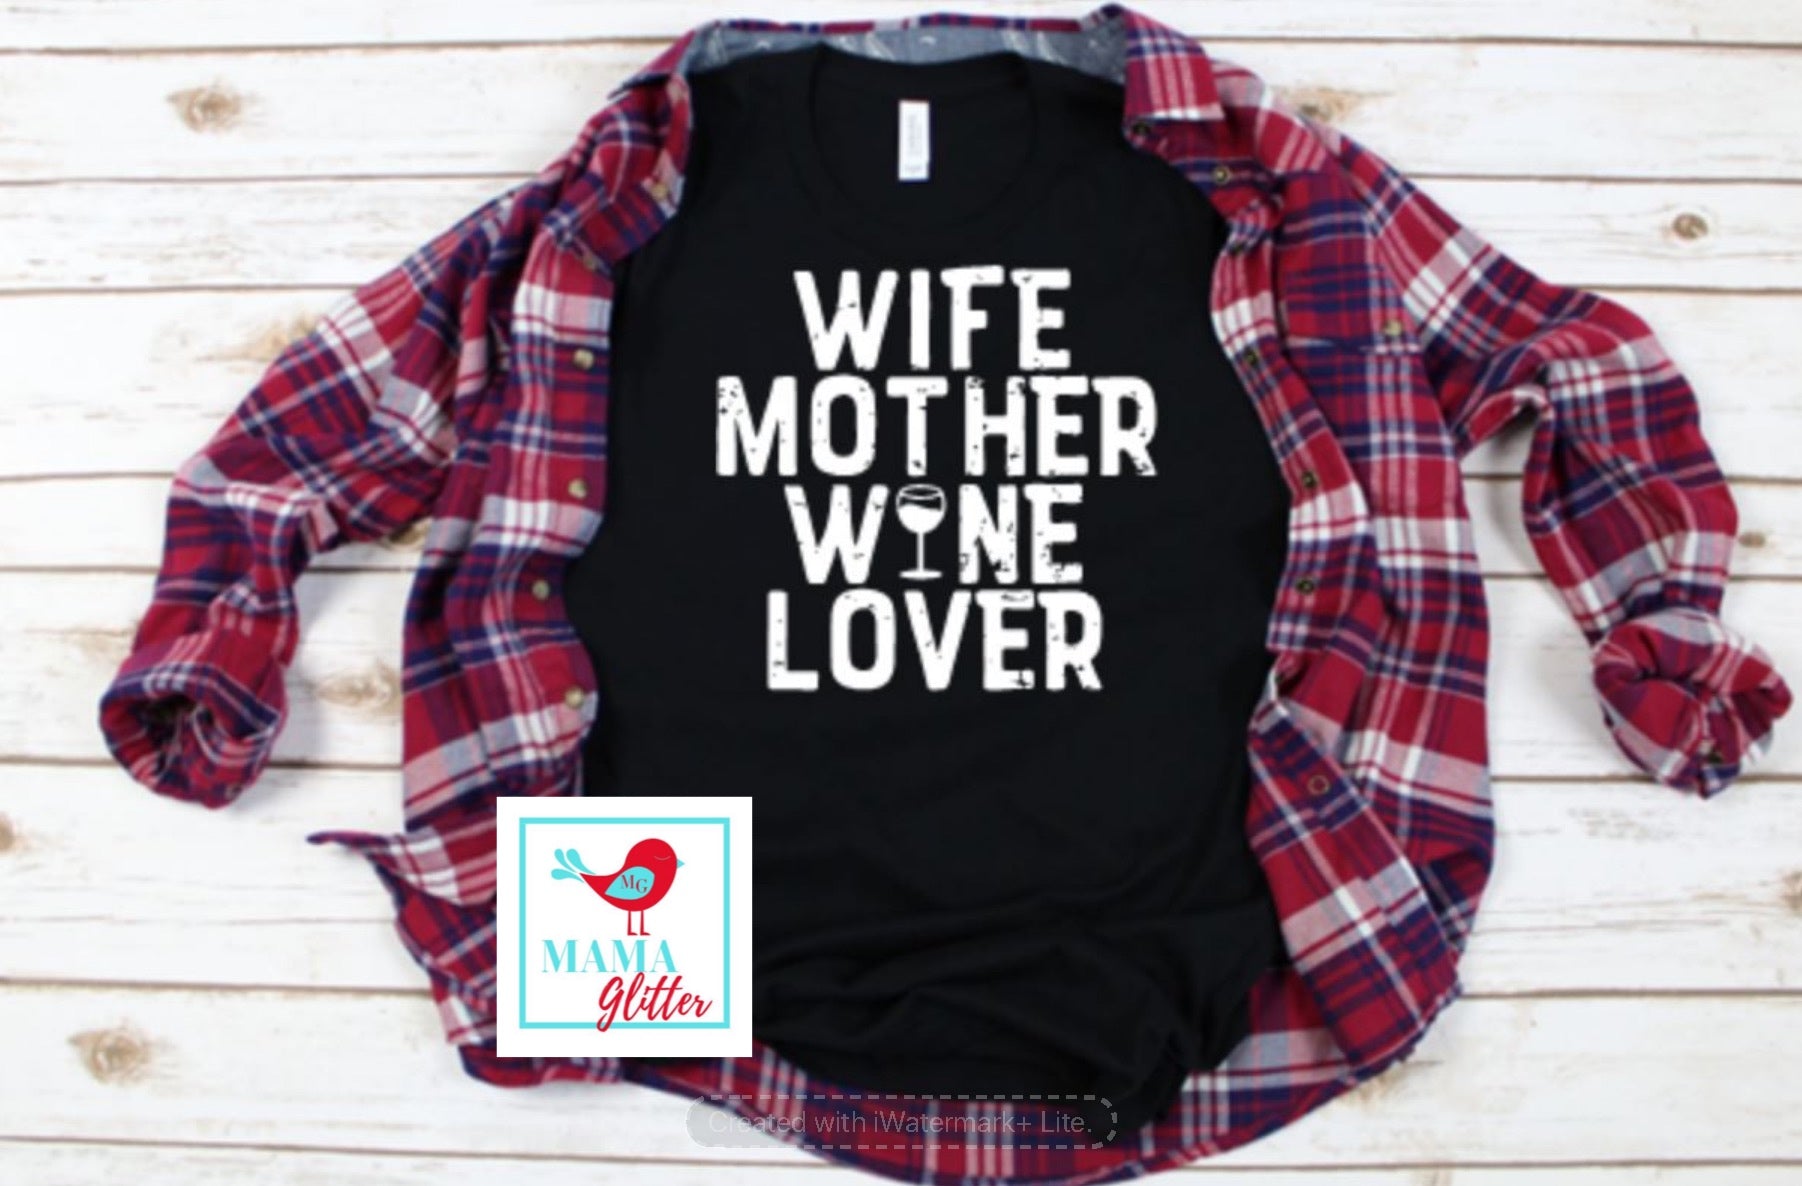 WIFE MOTHER WINE LOVER